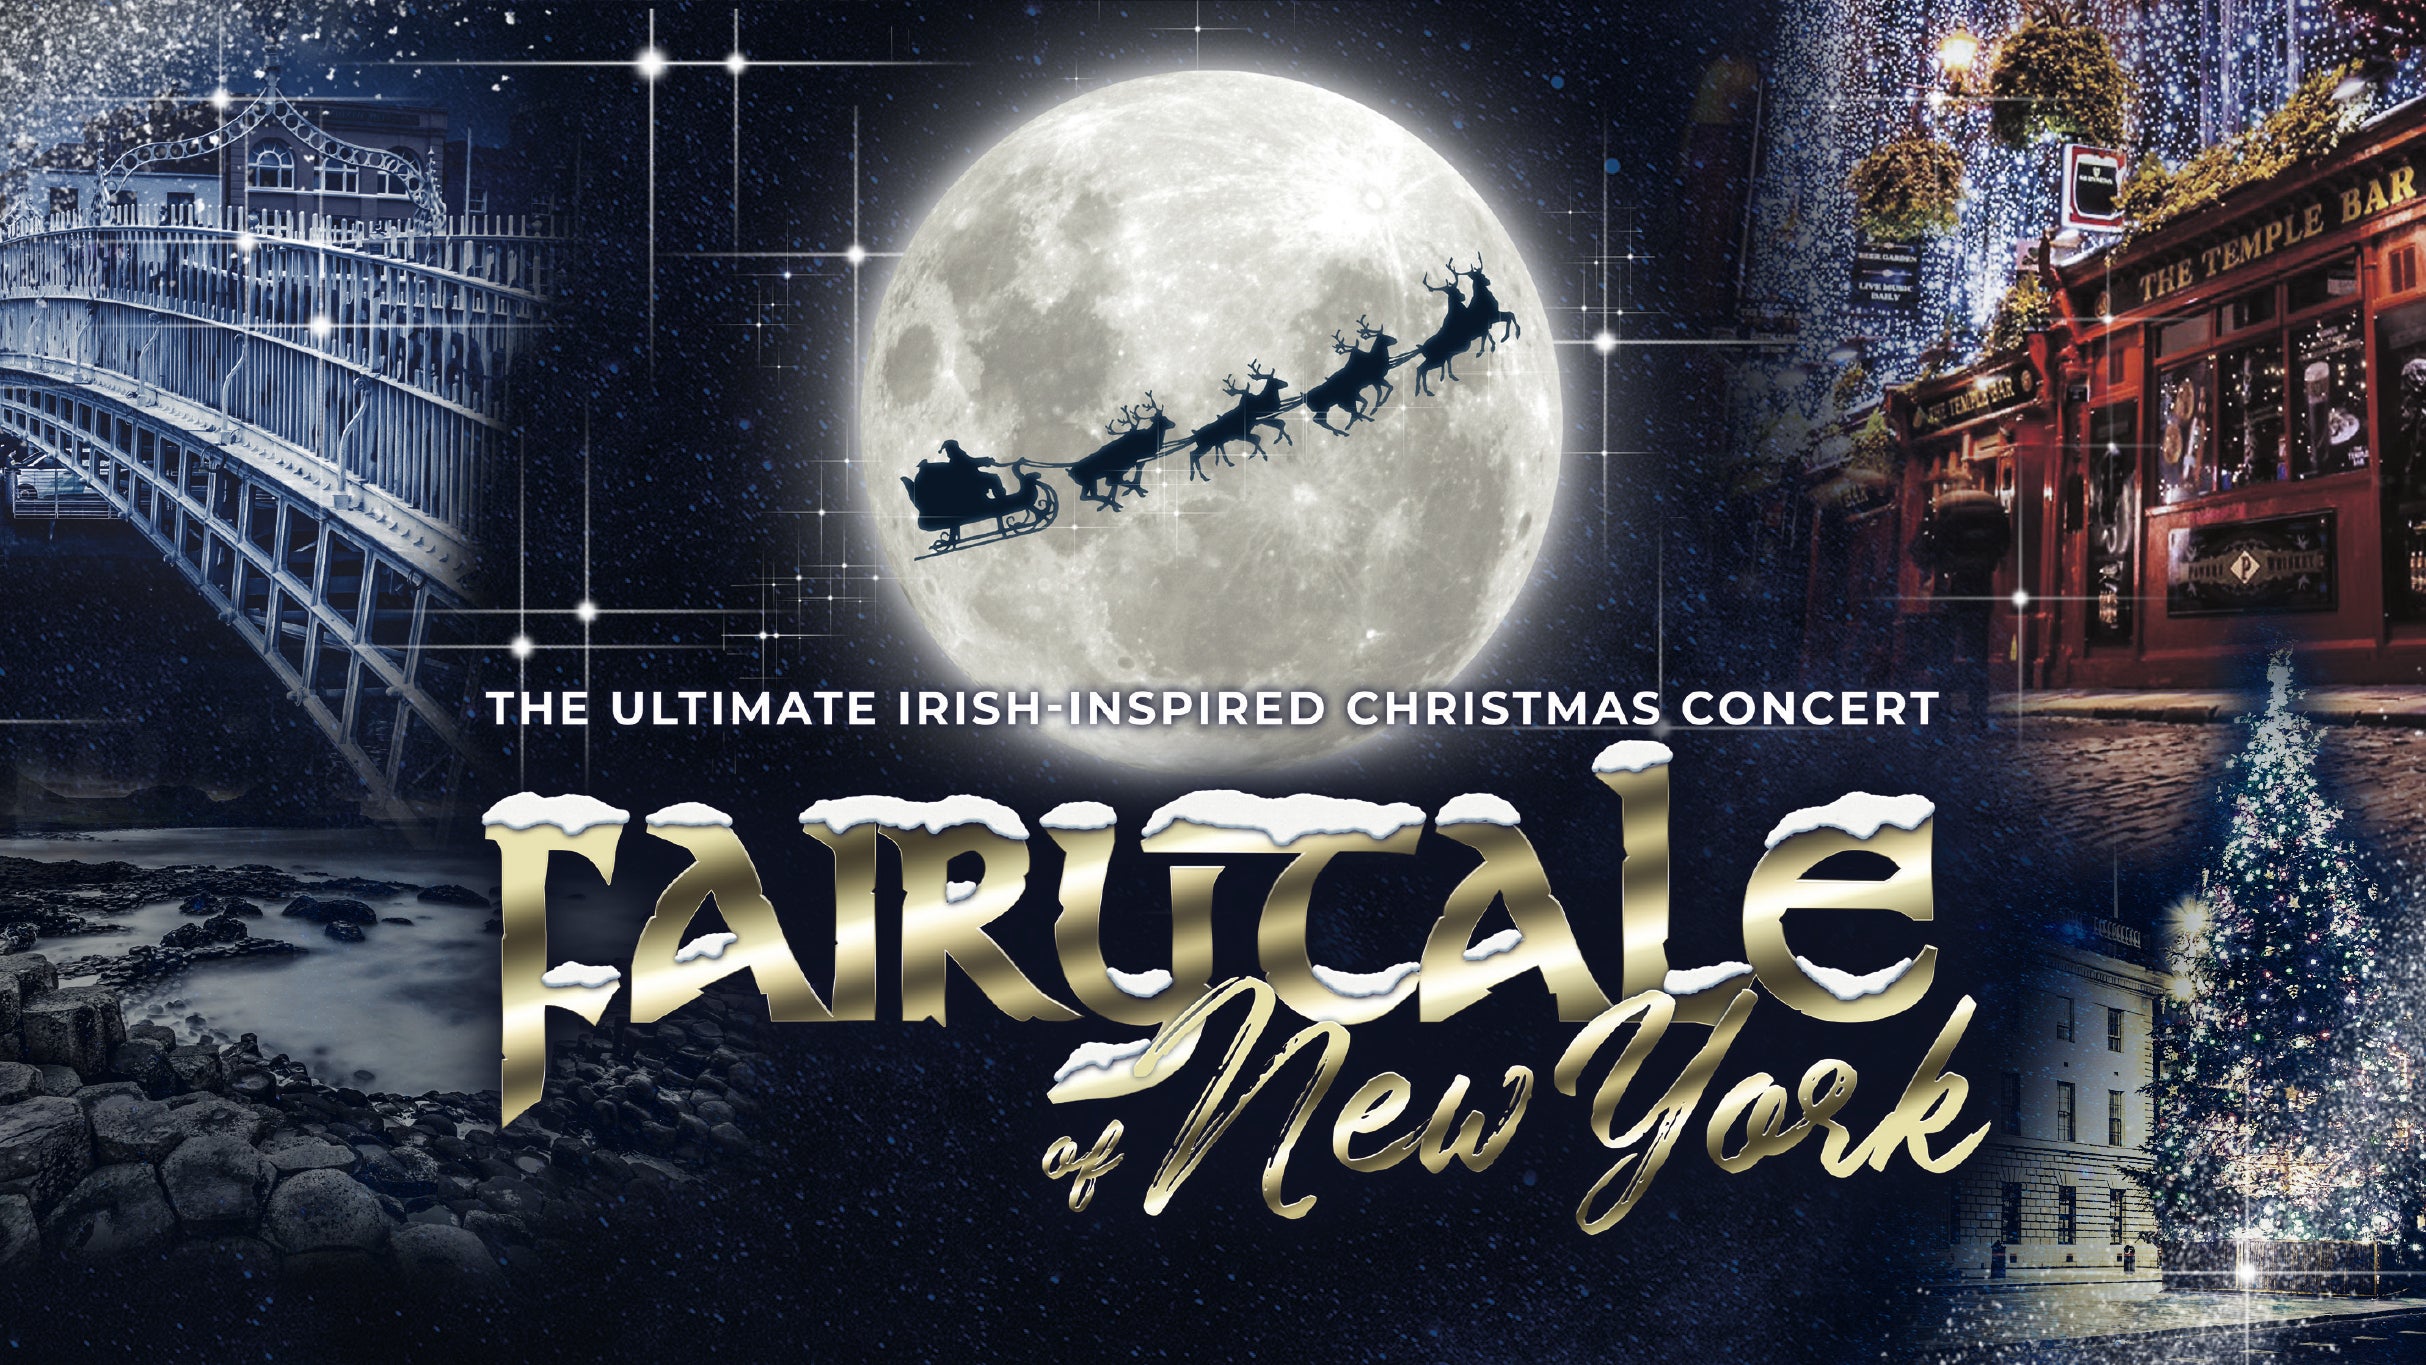 Fairytale of New York - Coming Home for Christmas in Birmingham promo photo for Cuffe & Taylor presale offer code